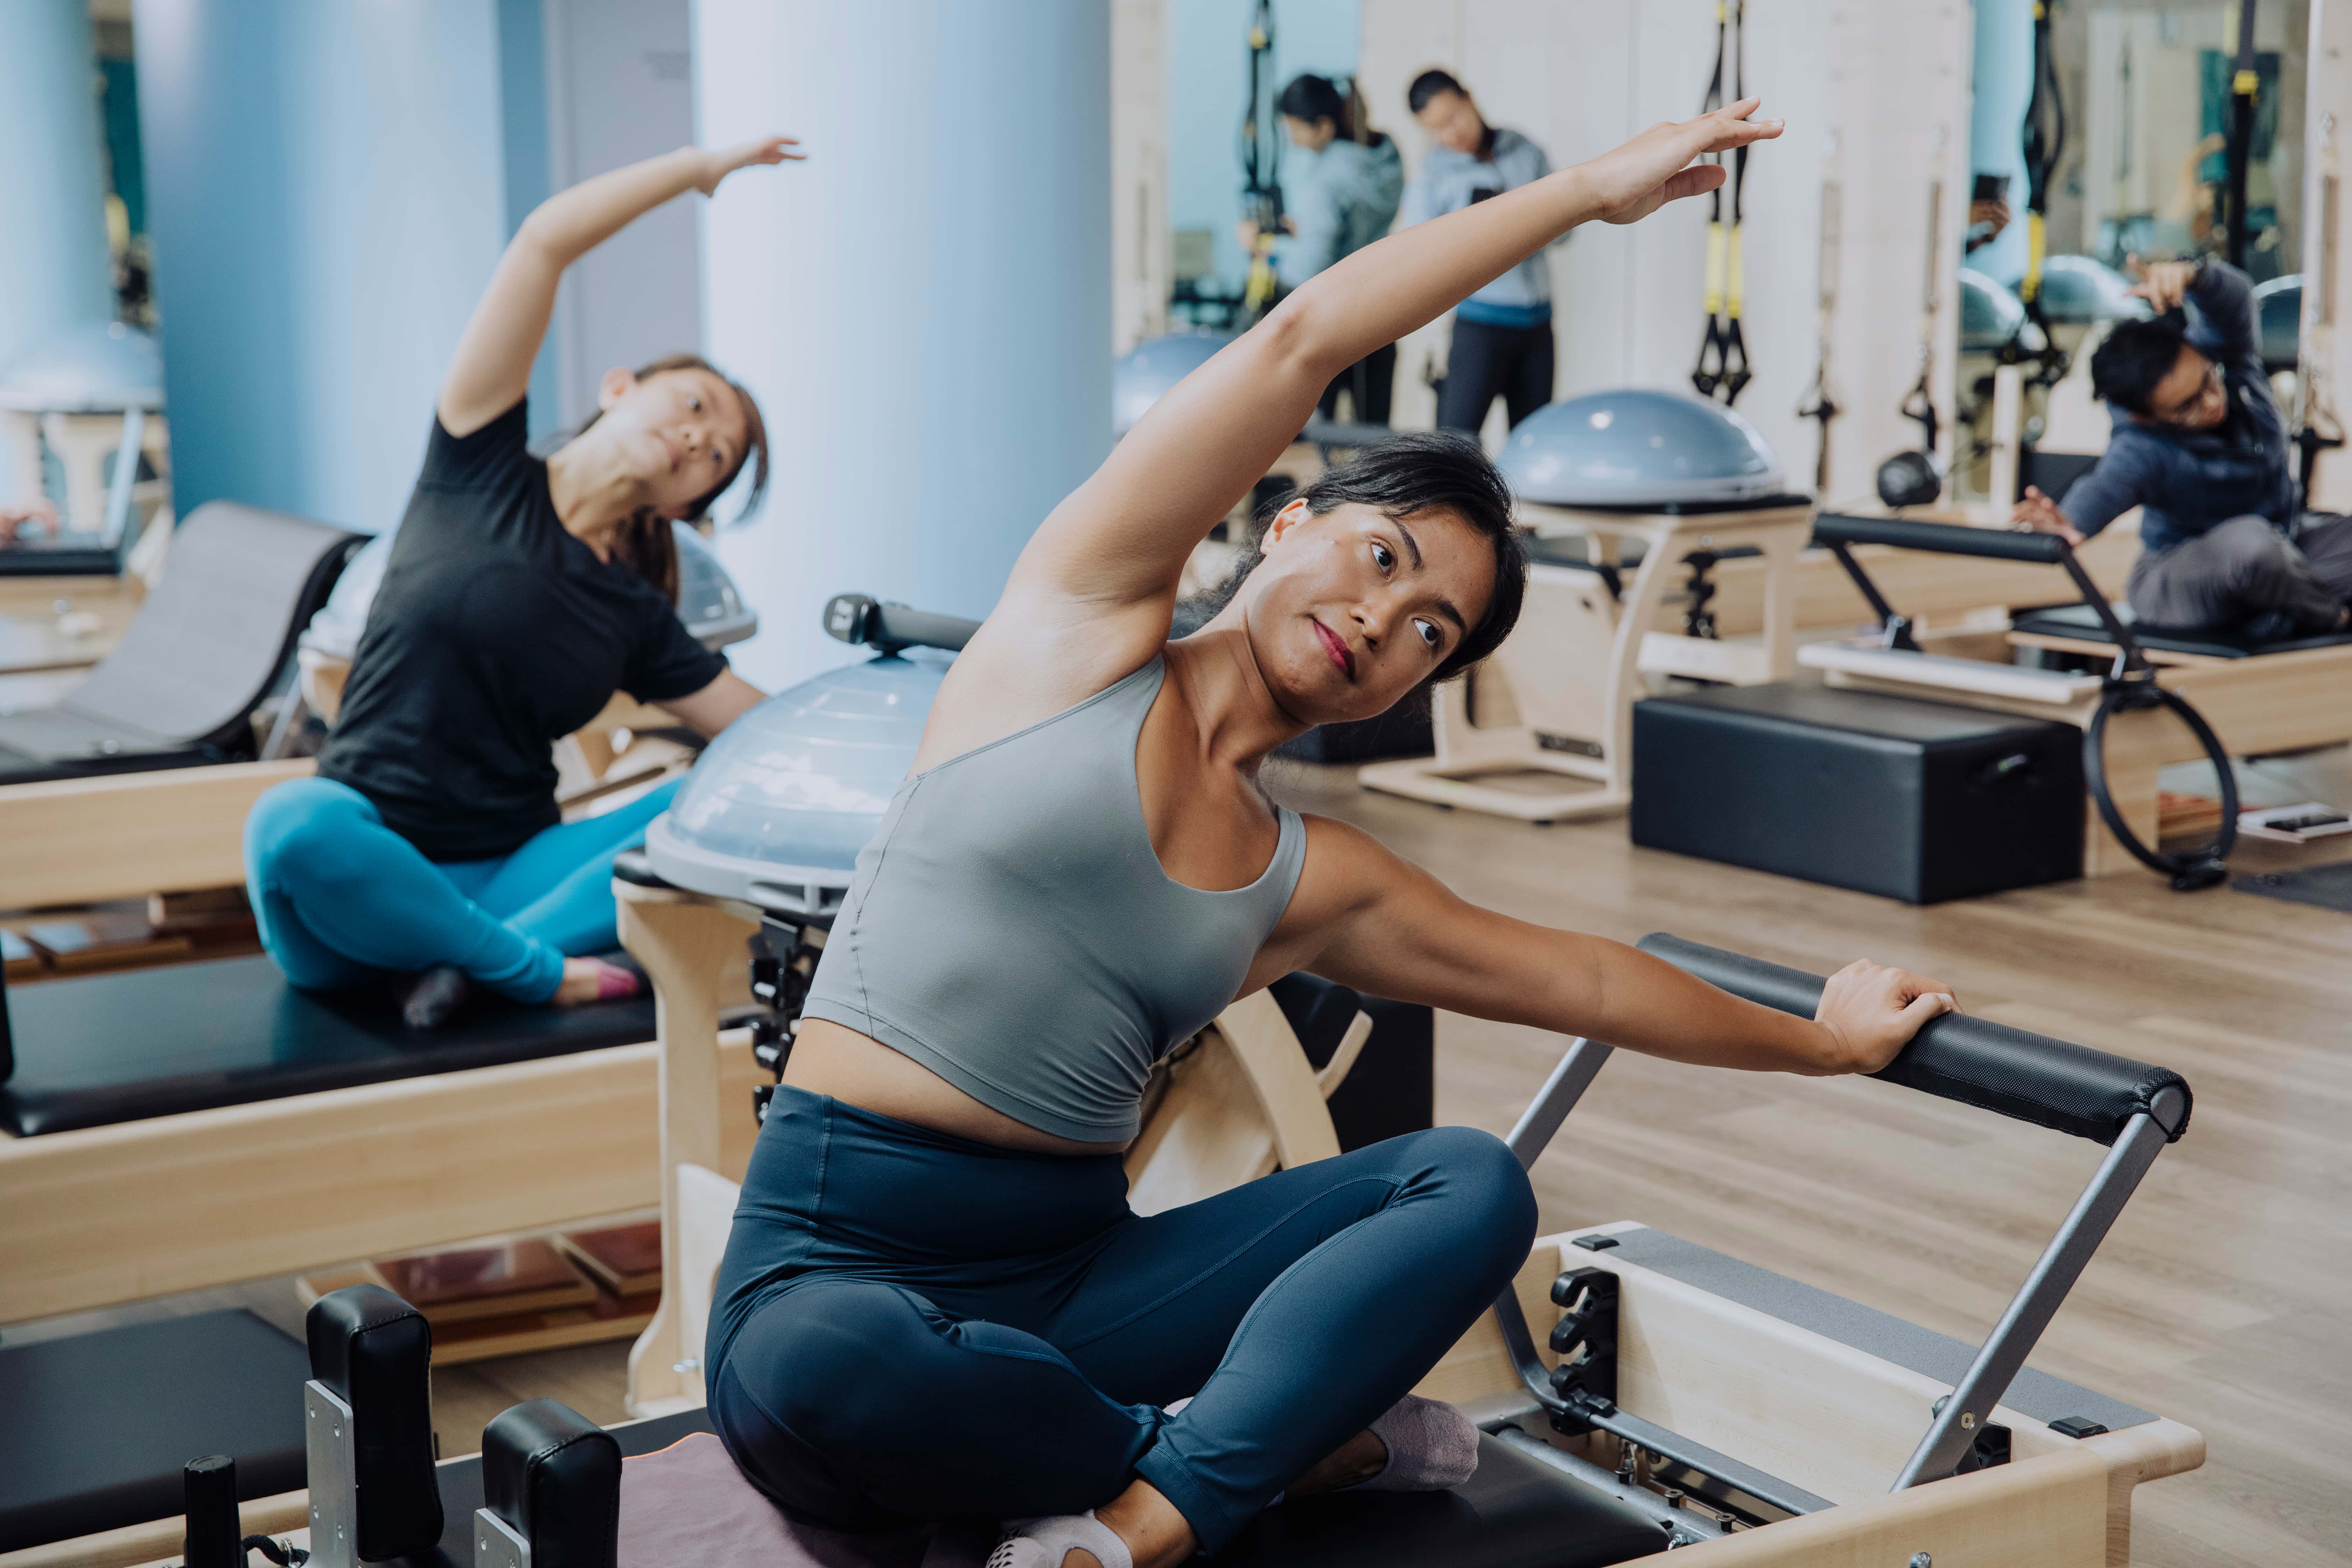 How Does Pilates Change Your Body?